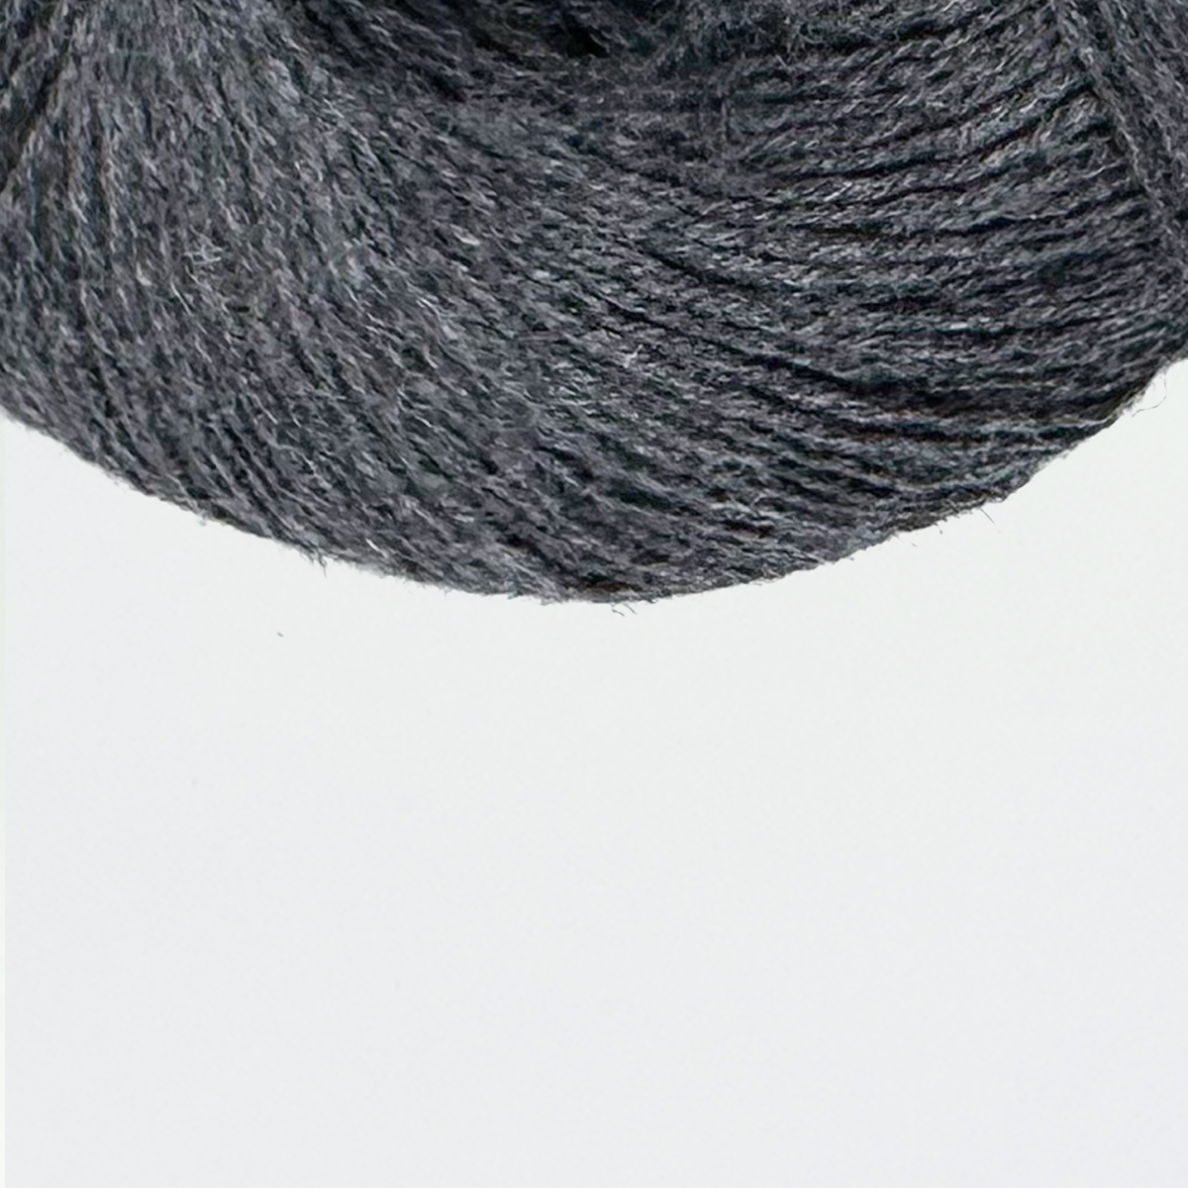 Knitting for Olive CottonMerino